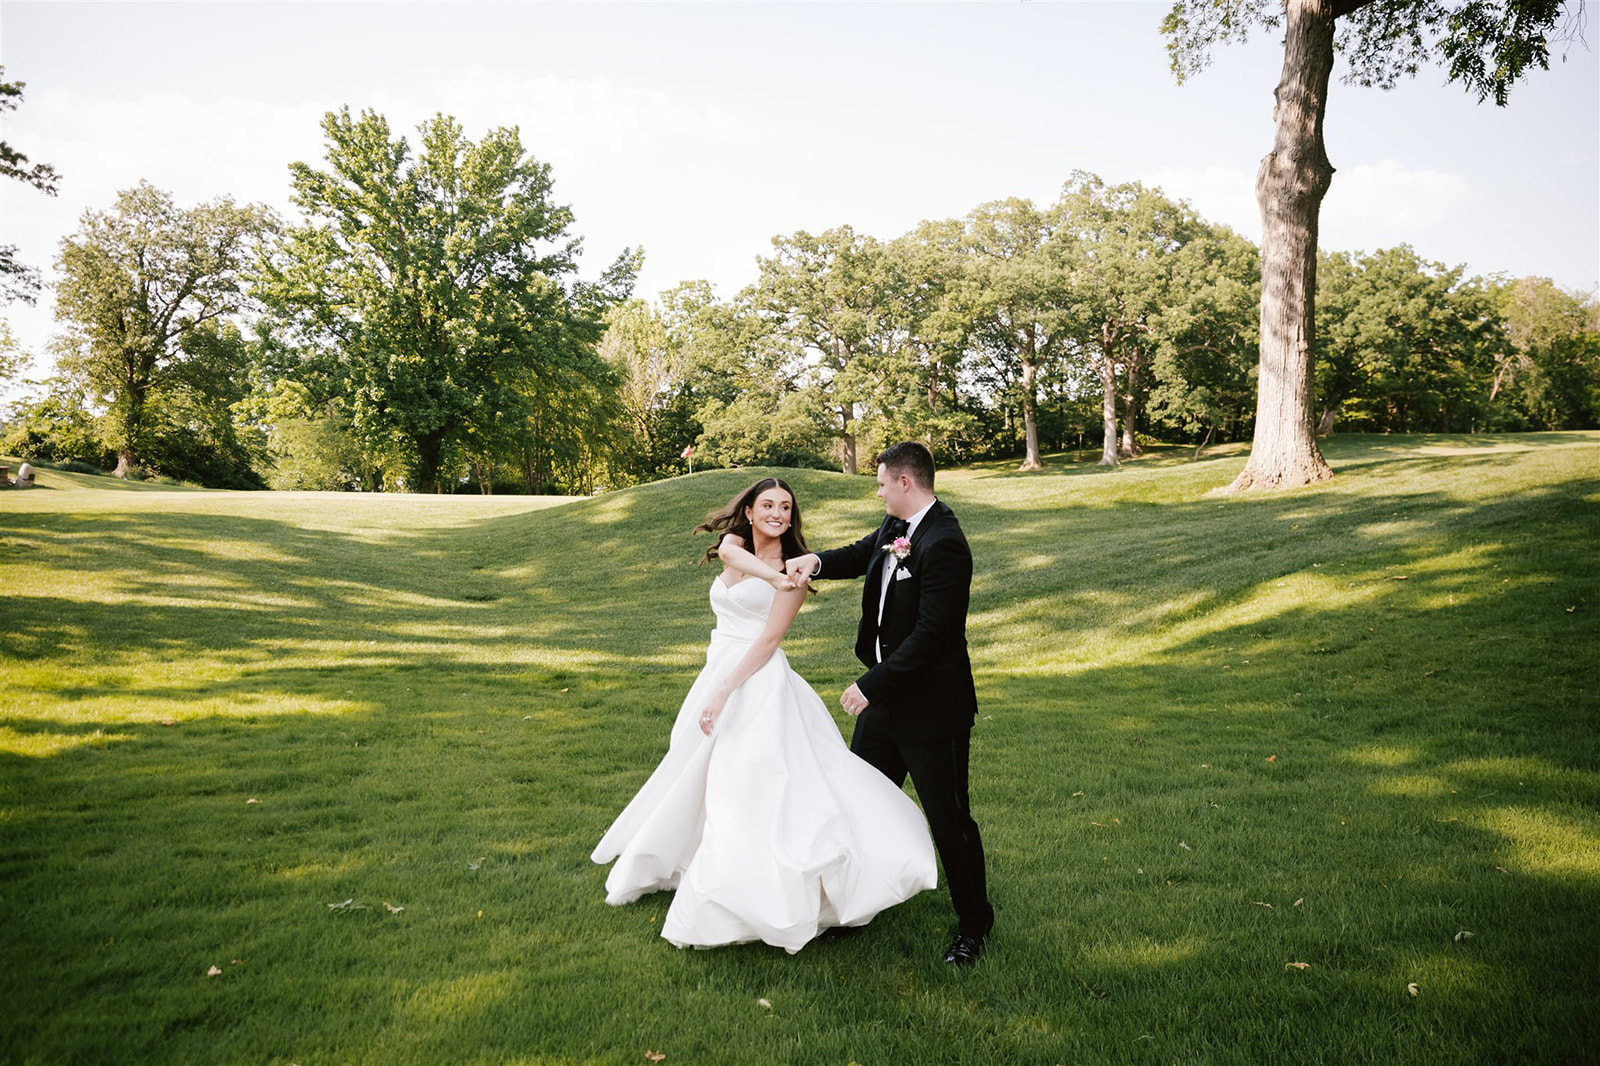 Candid portraits capturing the genuine emotions and joyful moments of the bride and groom in the warm glow of sunset.